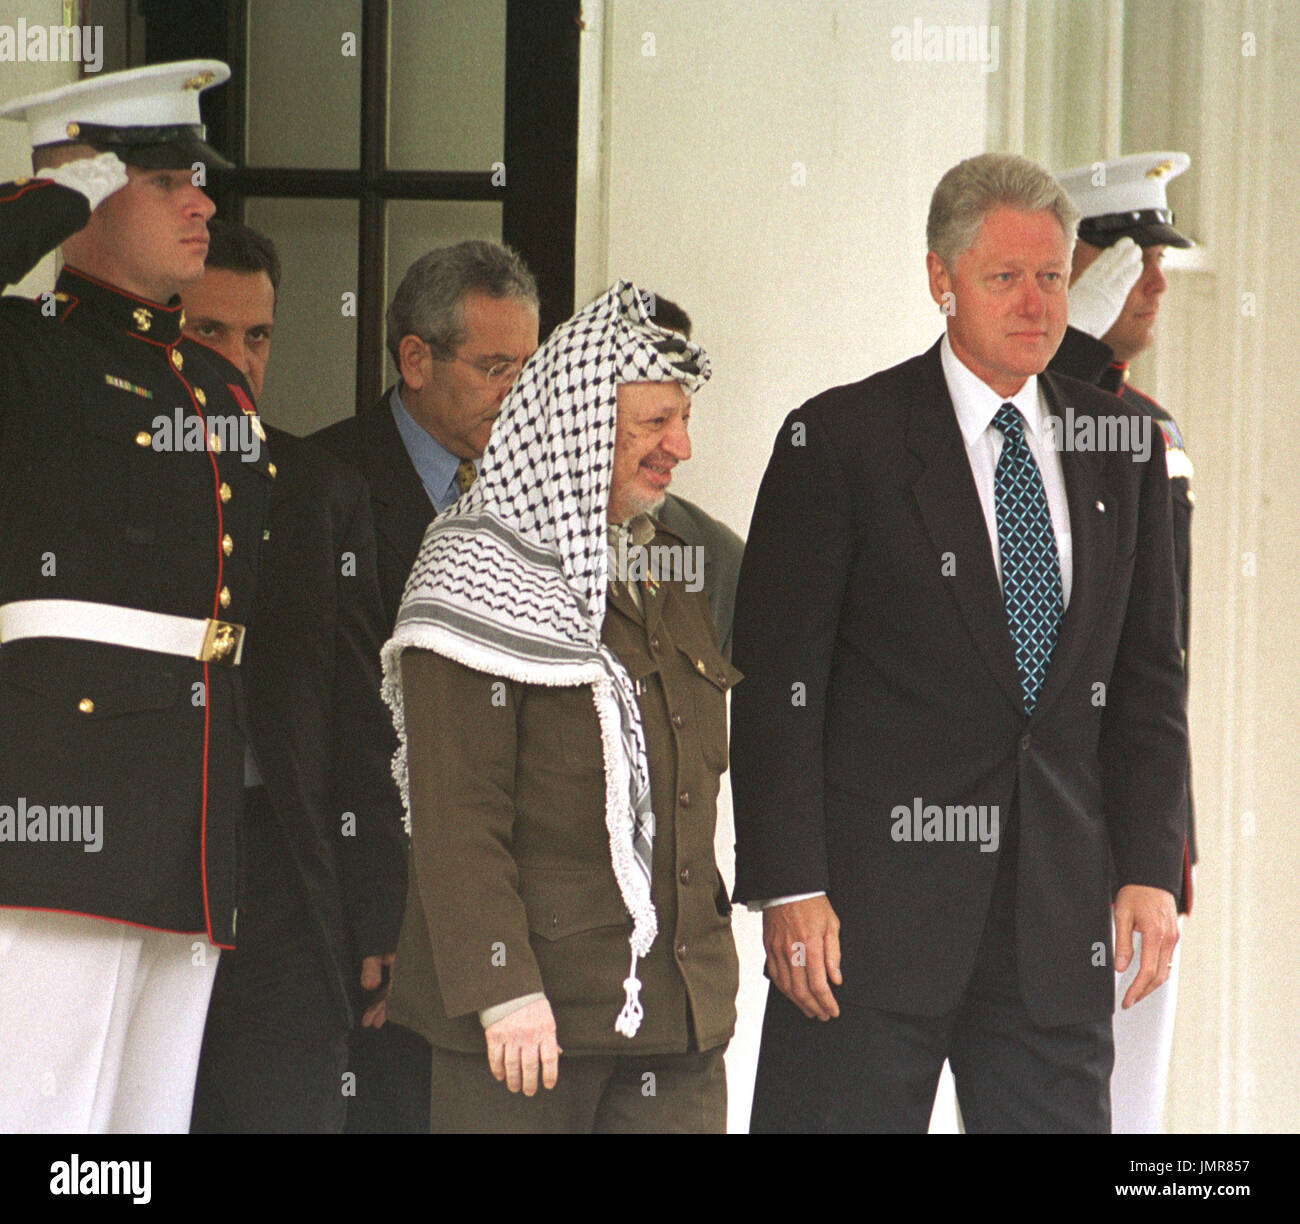 United States President Bill Clinton and walks Palestinian Authority Chairman Yasser Arafat from the West Wing of the White House after their talks in the Oval Office at the White House in Washington, DC on June 15, 2000. Stock Photo